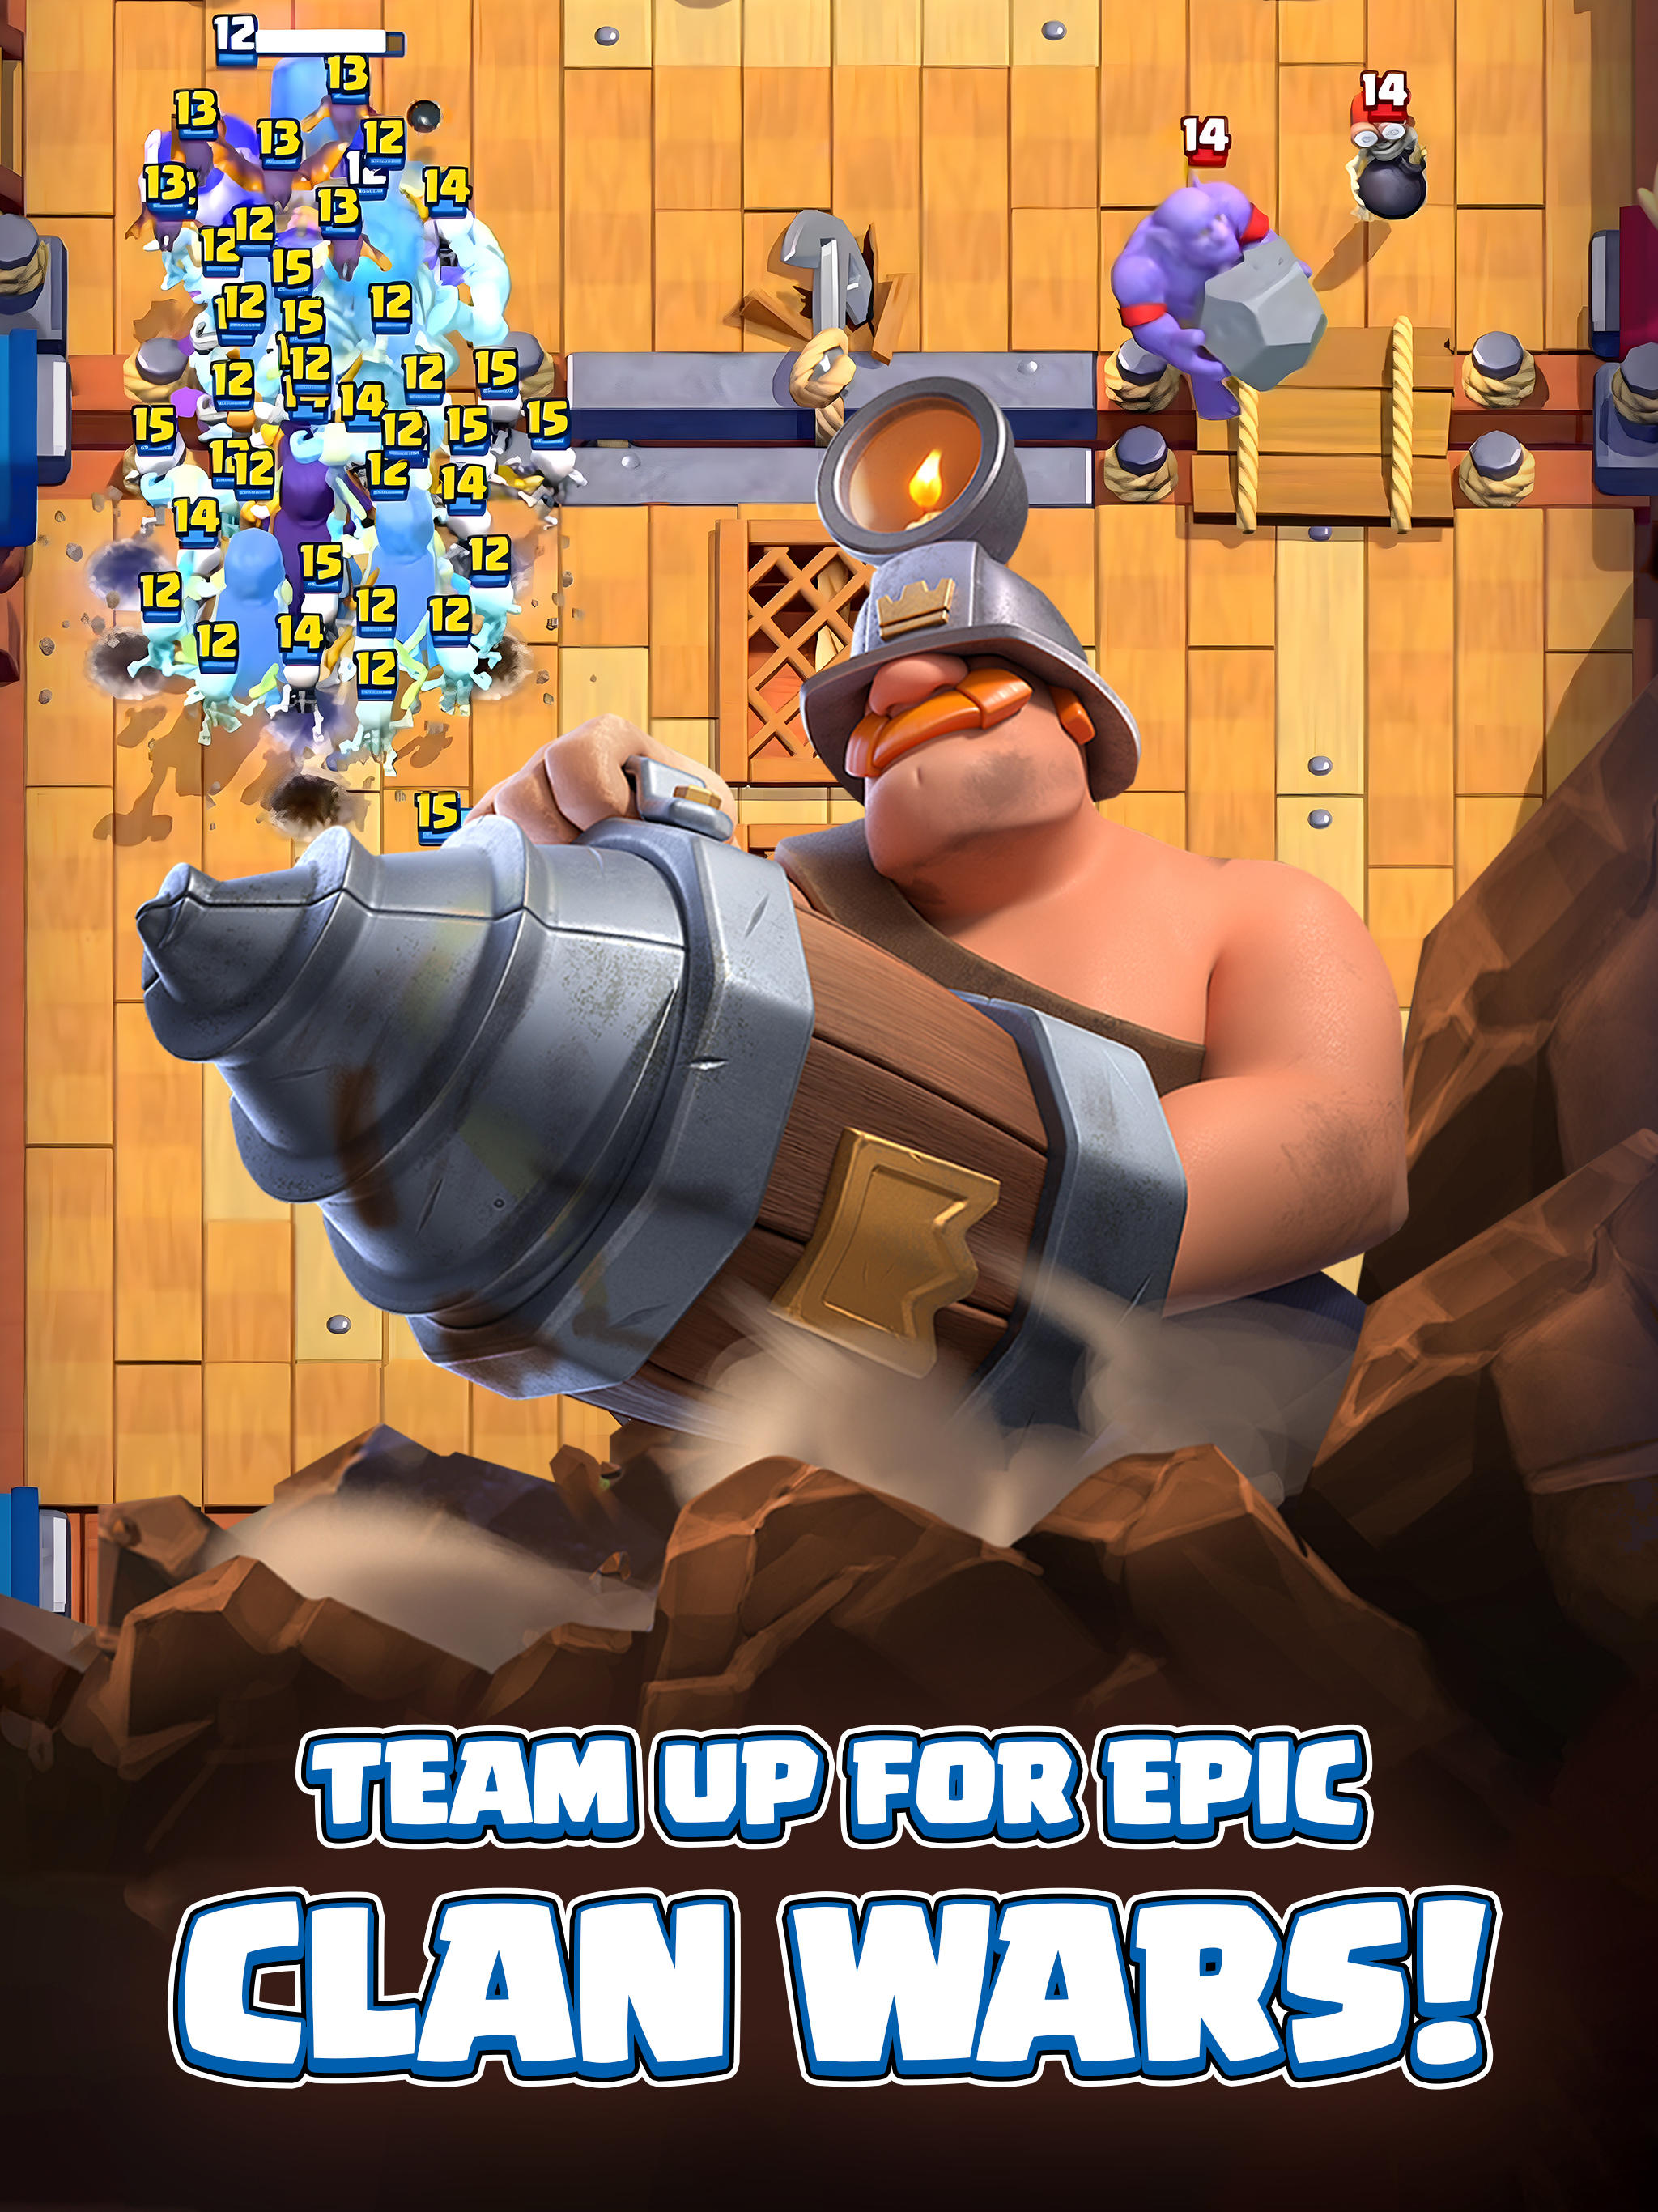 Arena 6 deck suggestions ? Just reinstalled the game : r/ClashRoyale